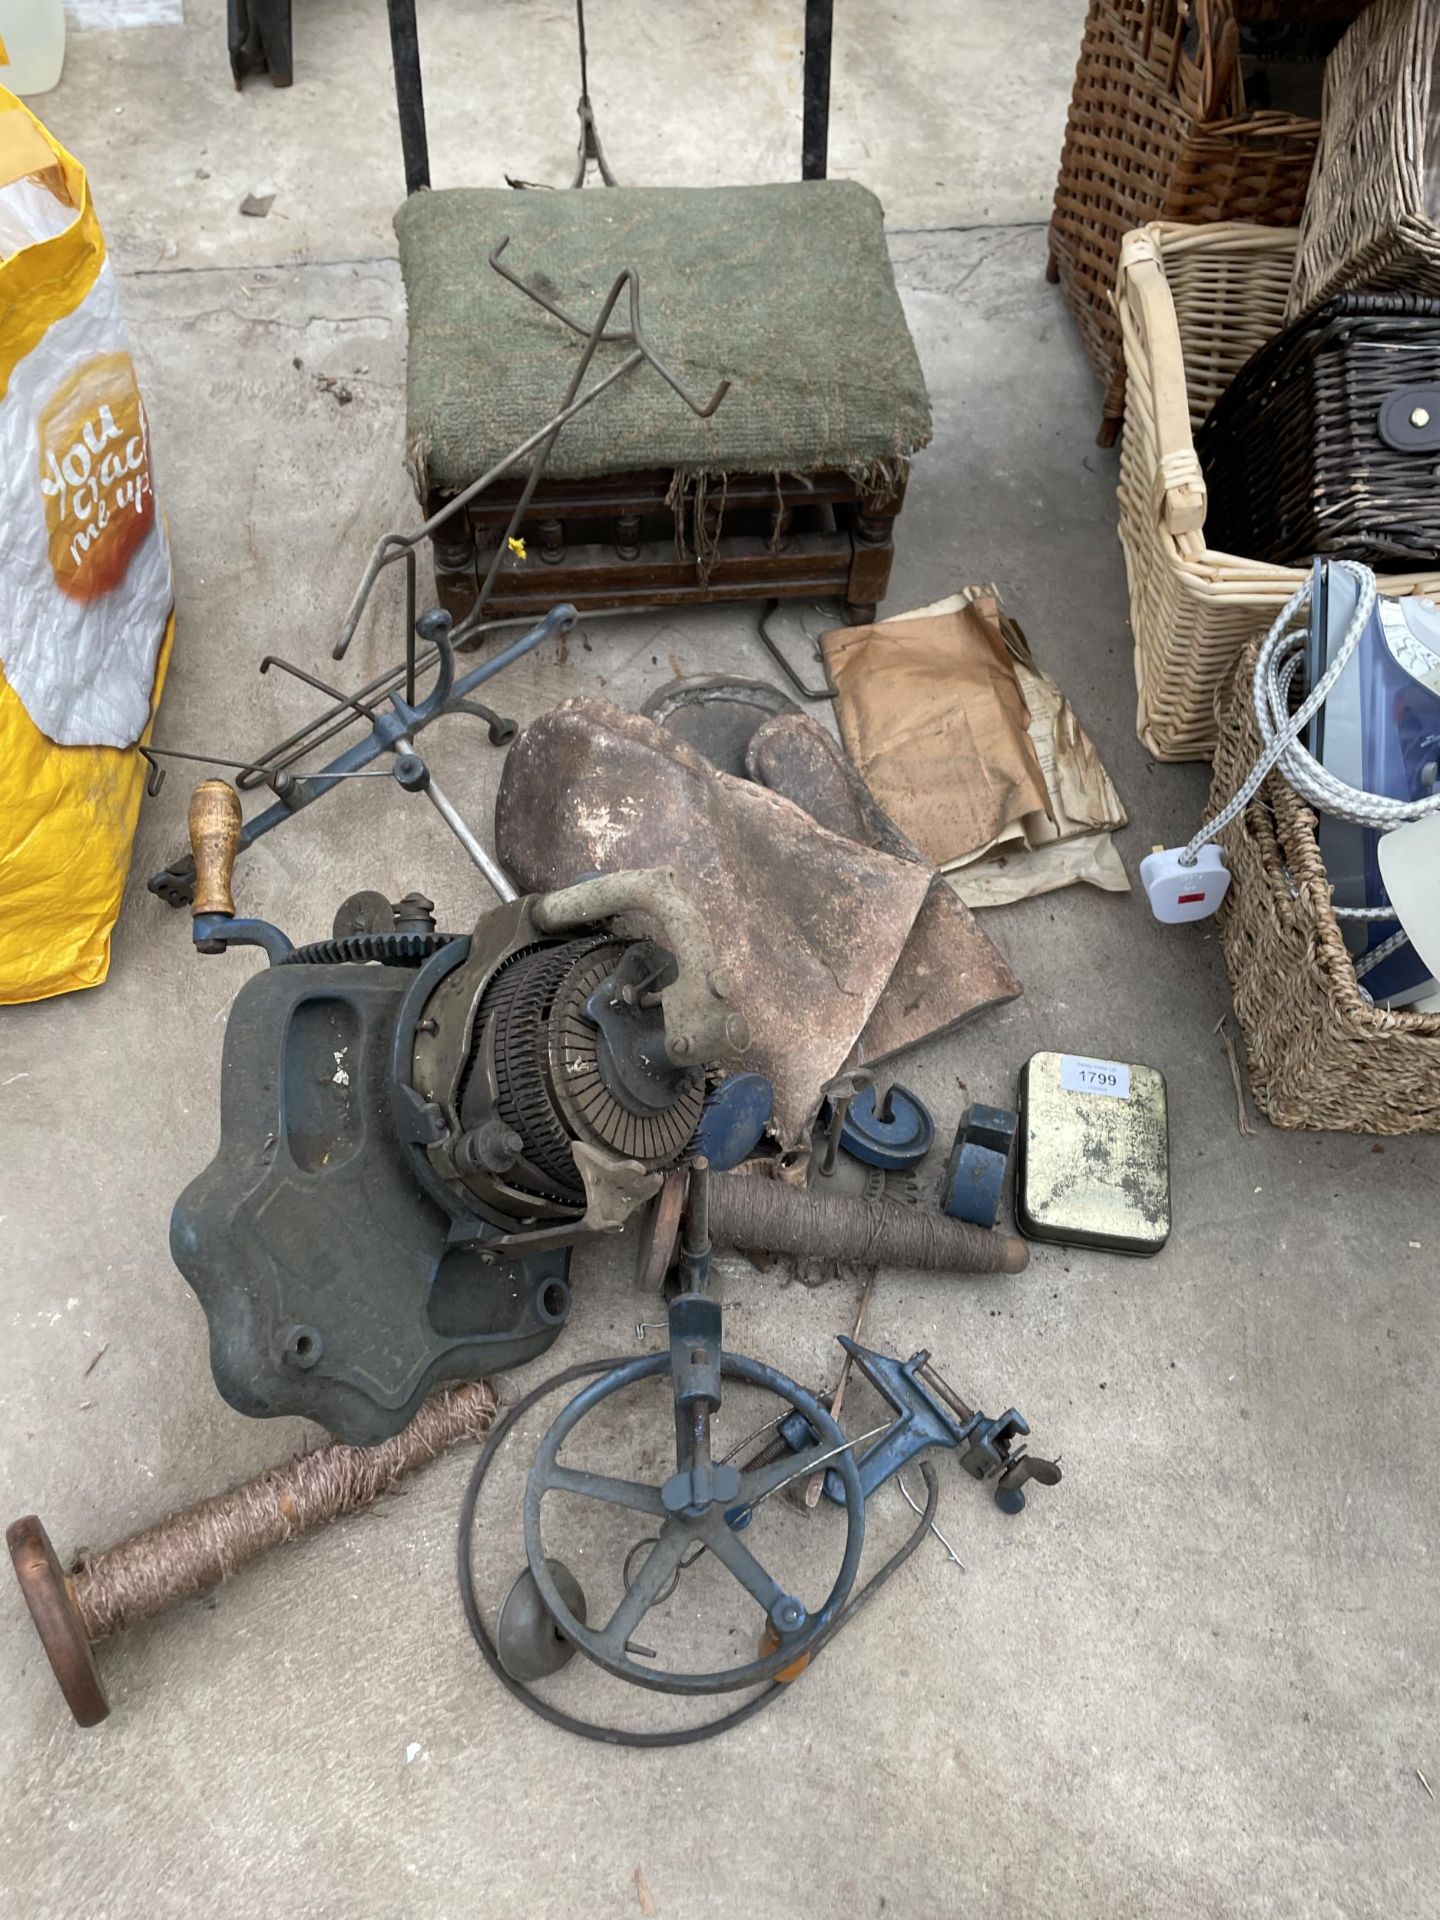 AN ASSORTMENT OF VINTAGE ITEMS TO INCLUDE A METAL STAND, A SMALL STOOL AND A MANUAL GRINDER ETC - Image 3 of 3